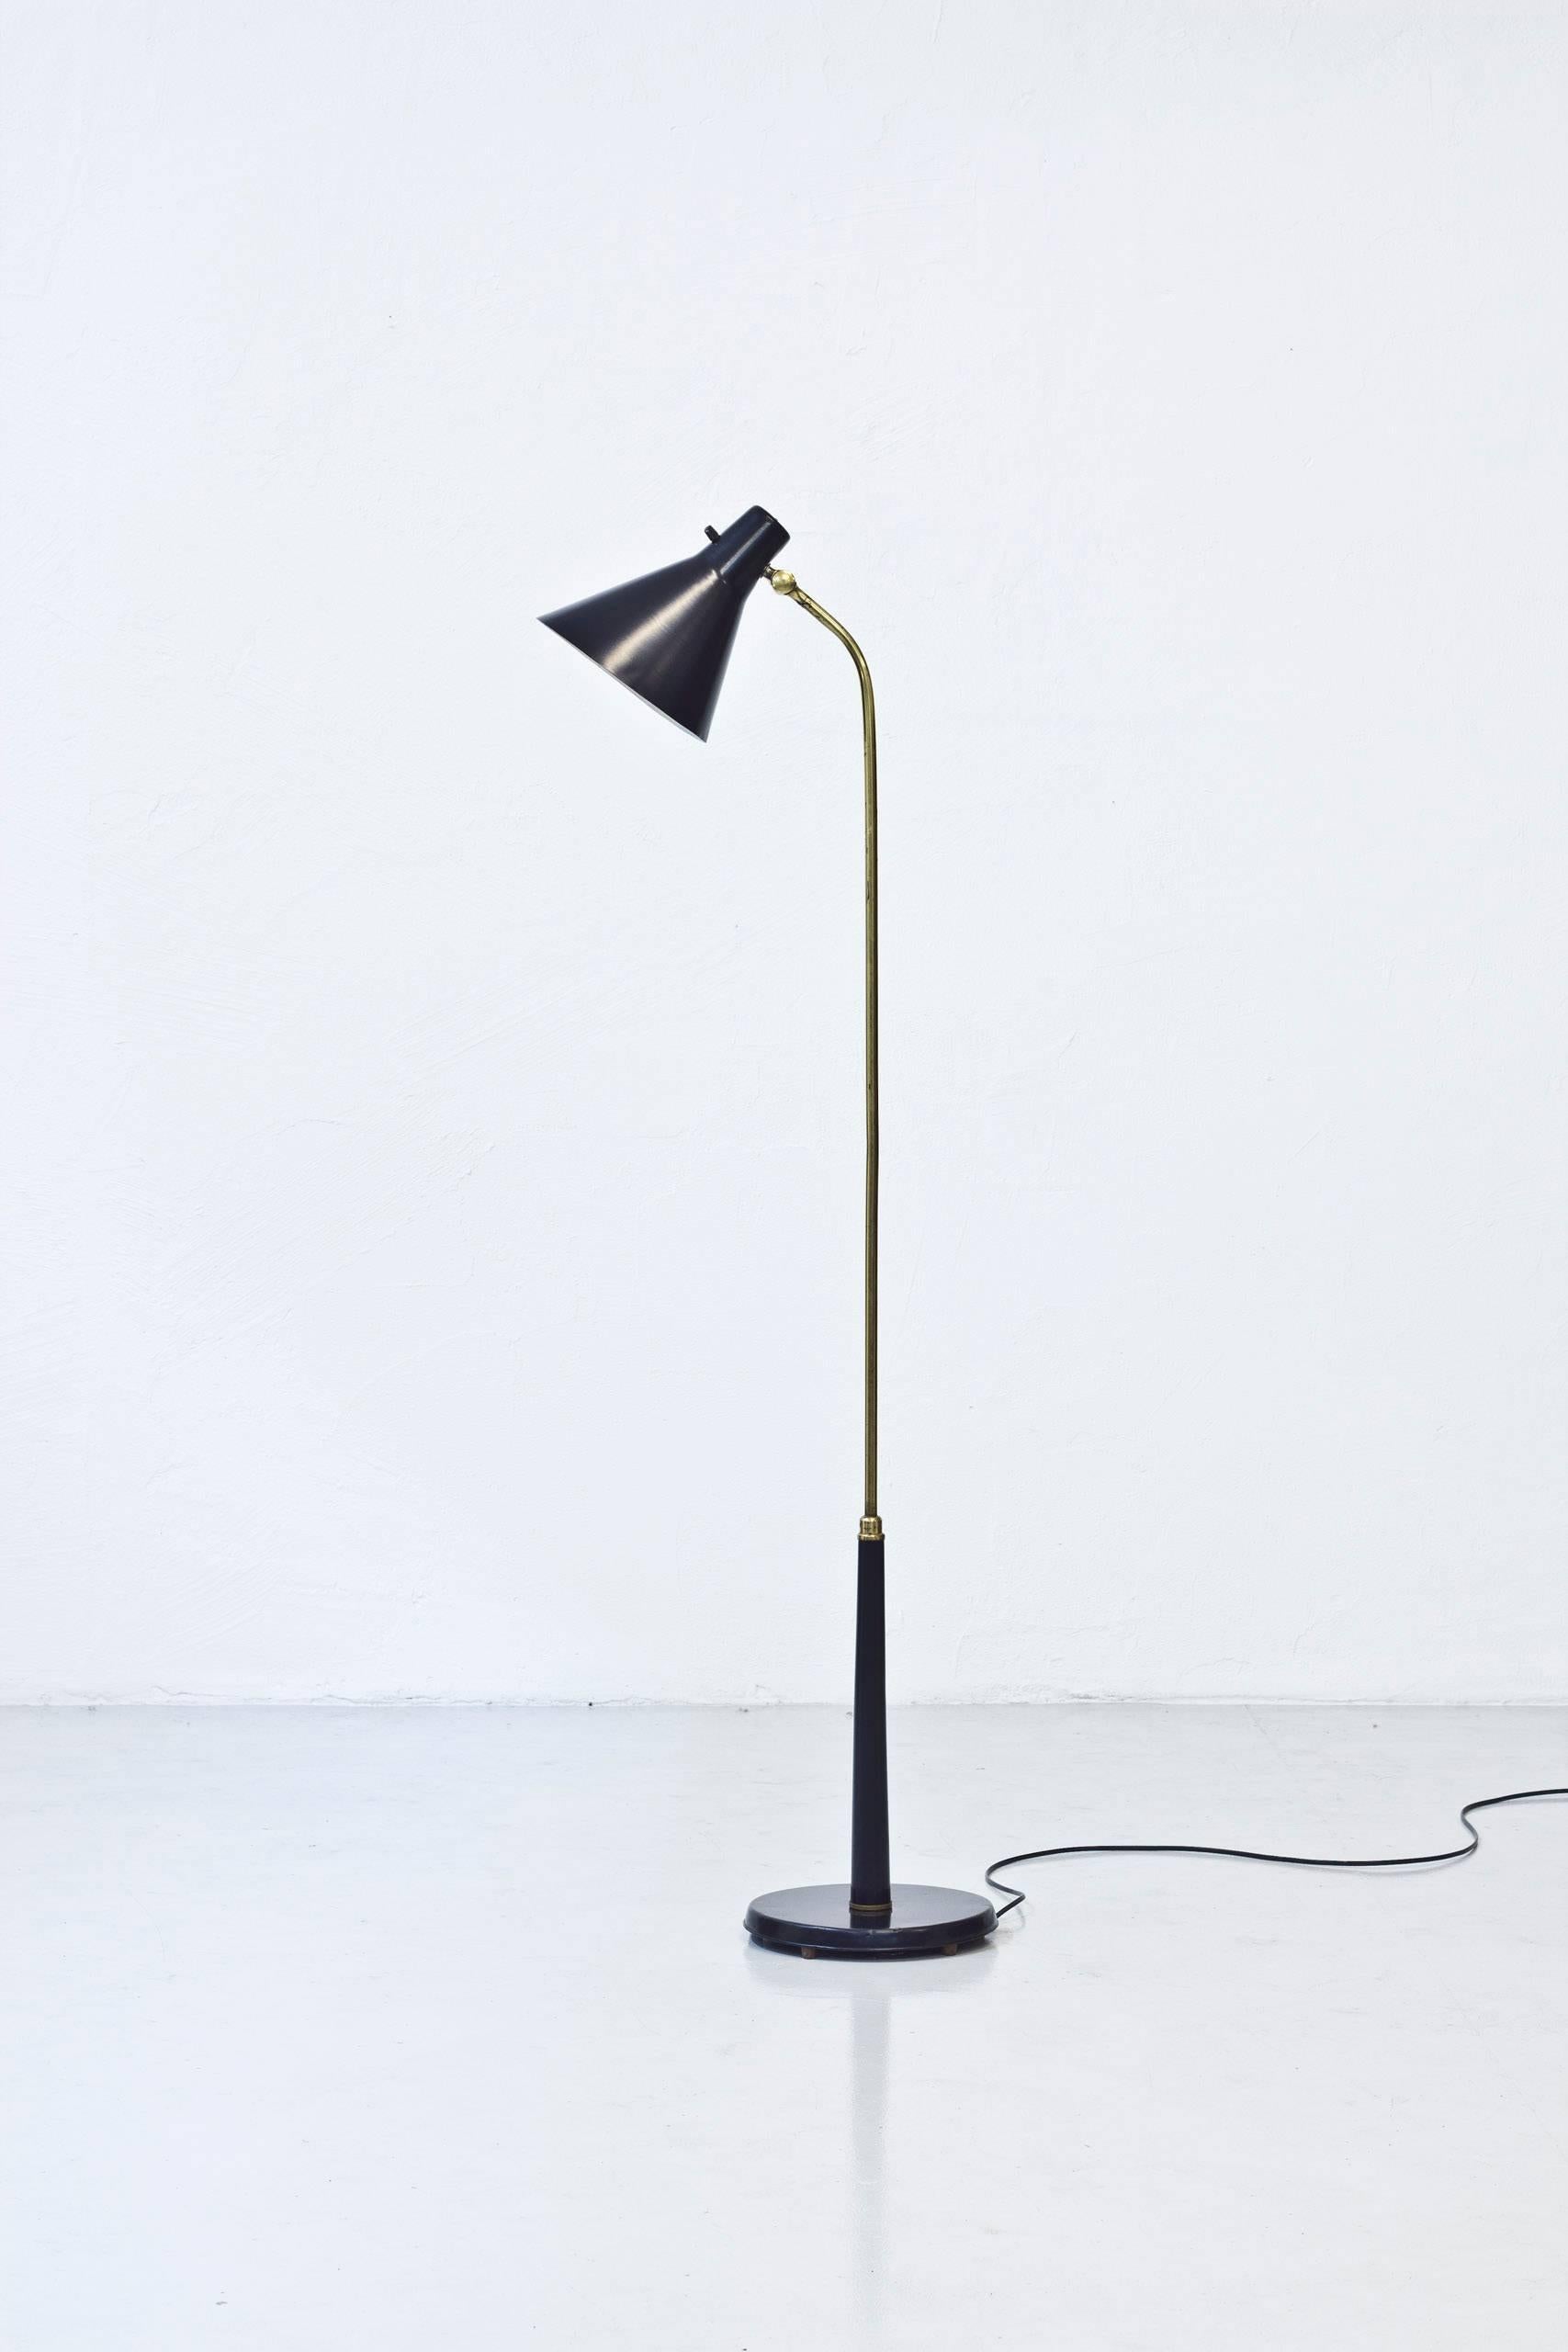 Floor lamp produced in Sweden by Nordiska Kompaniet during the 1950s. Most likely designed by their head of  design at the lighting department, Bertil Brisborg. Polished brass and black lacquered metal. Original light switch on top of the shade in